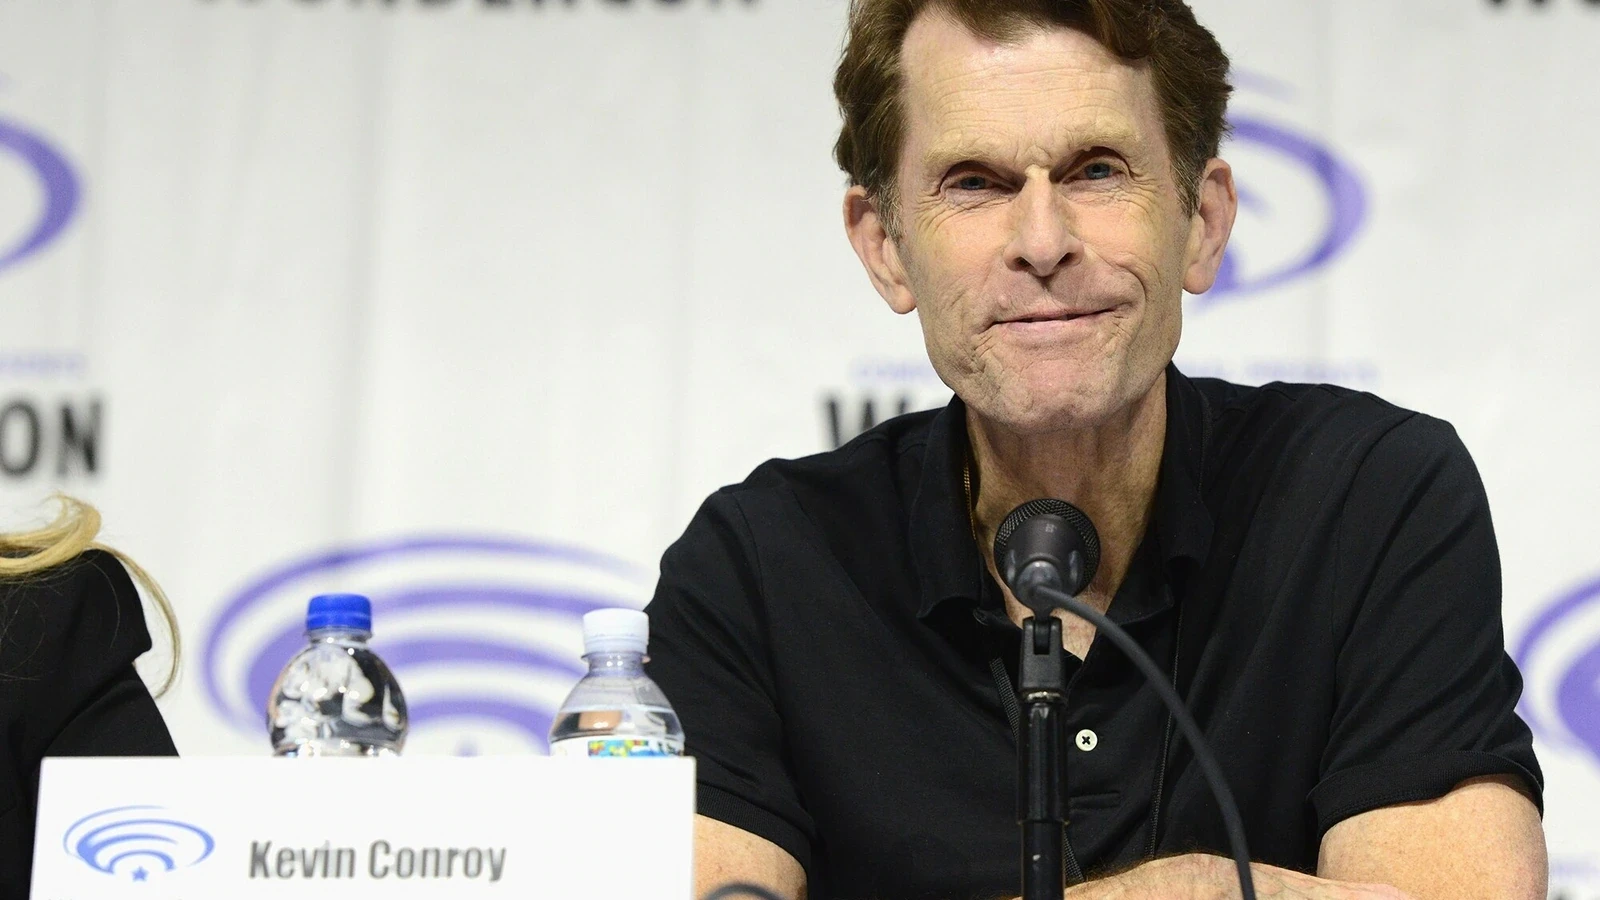 Kevin Conroy loved to interact with fans.